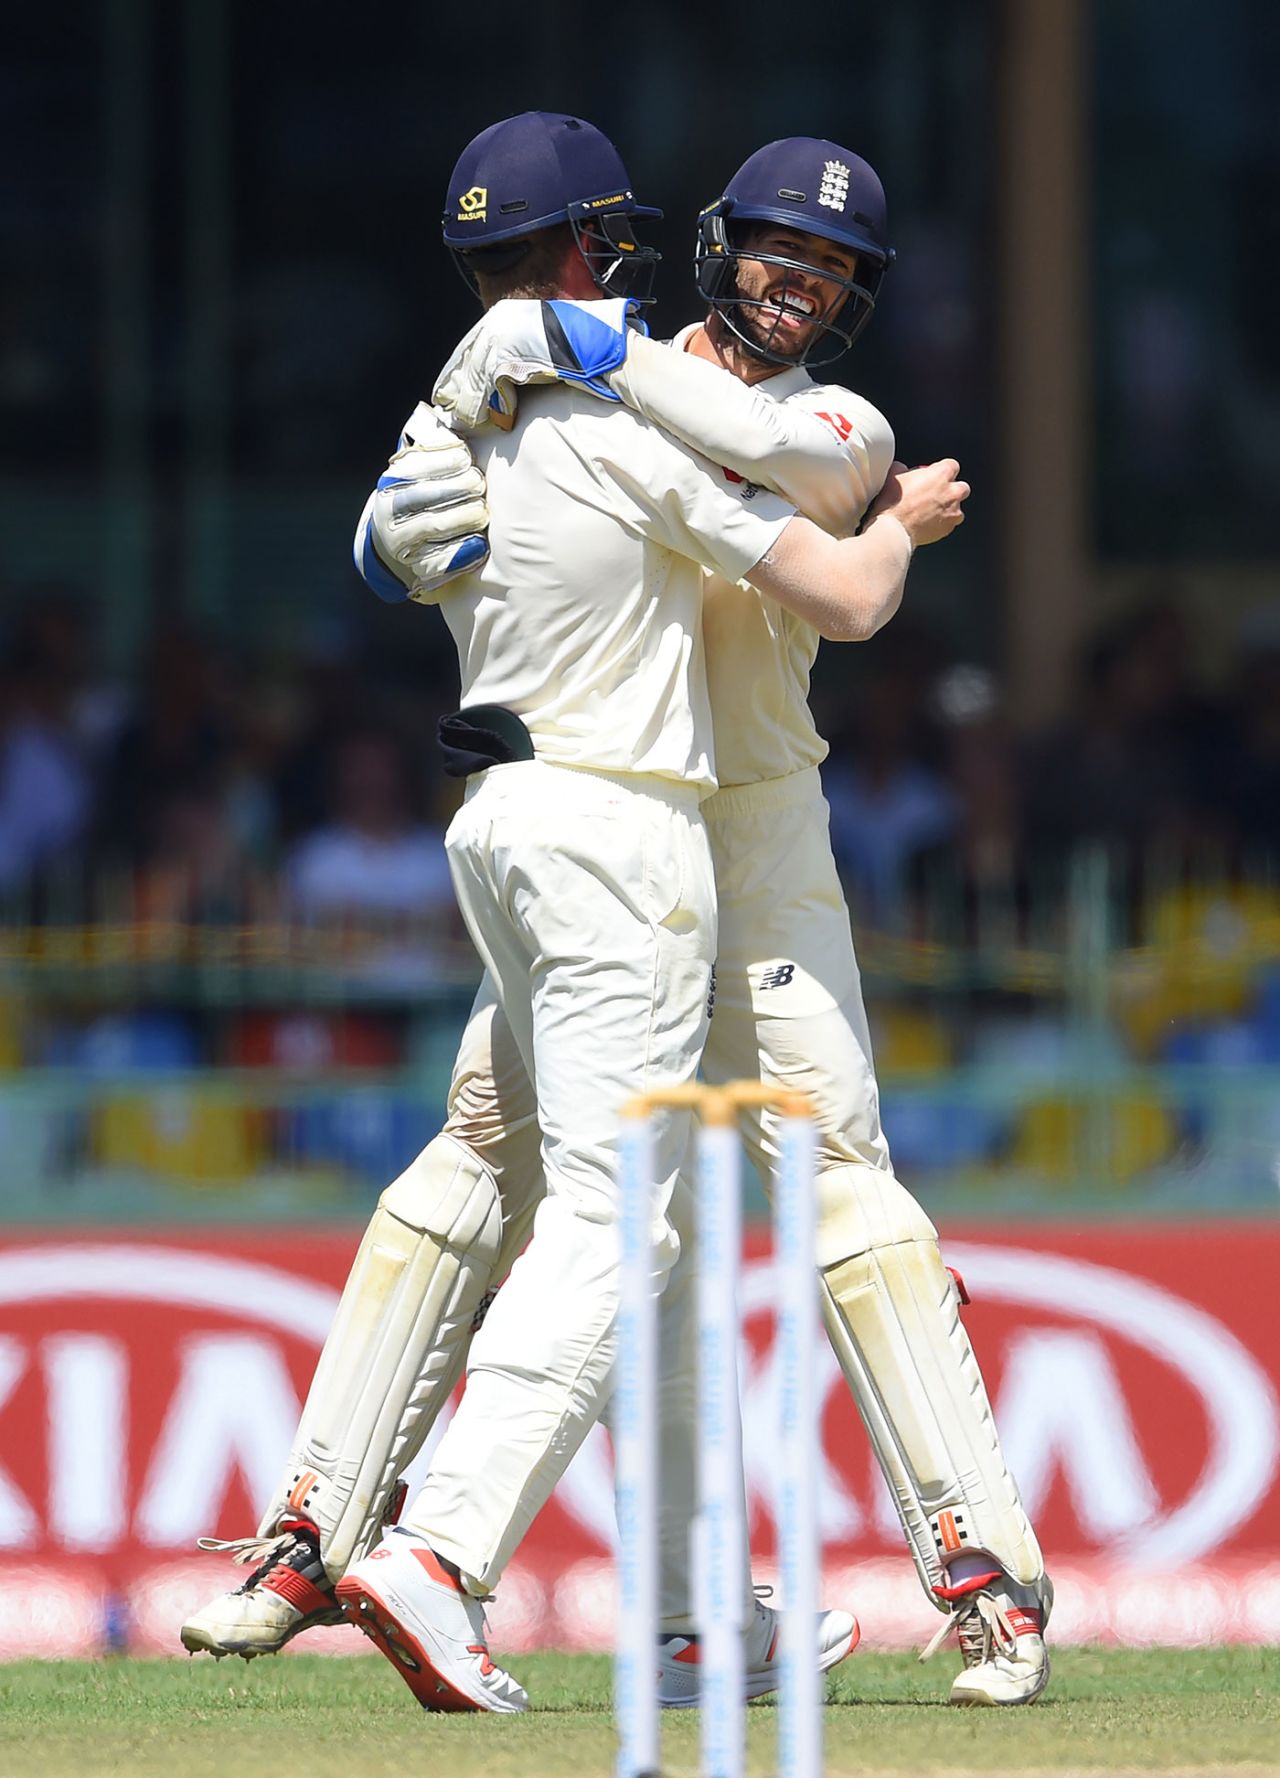 Ben Foakes celebrates with Keaton Jennings after another blinder at short leg, Sri Lanka v England, 3rd Test, Colombo, 2nd day, November 23, 2018